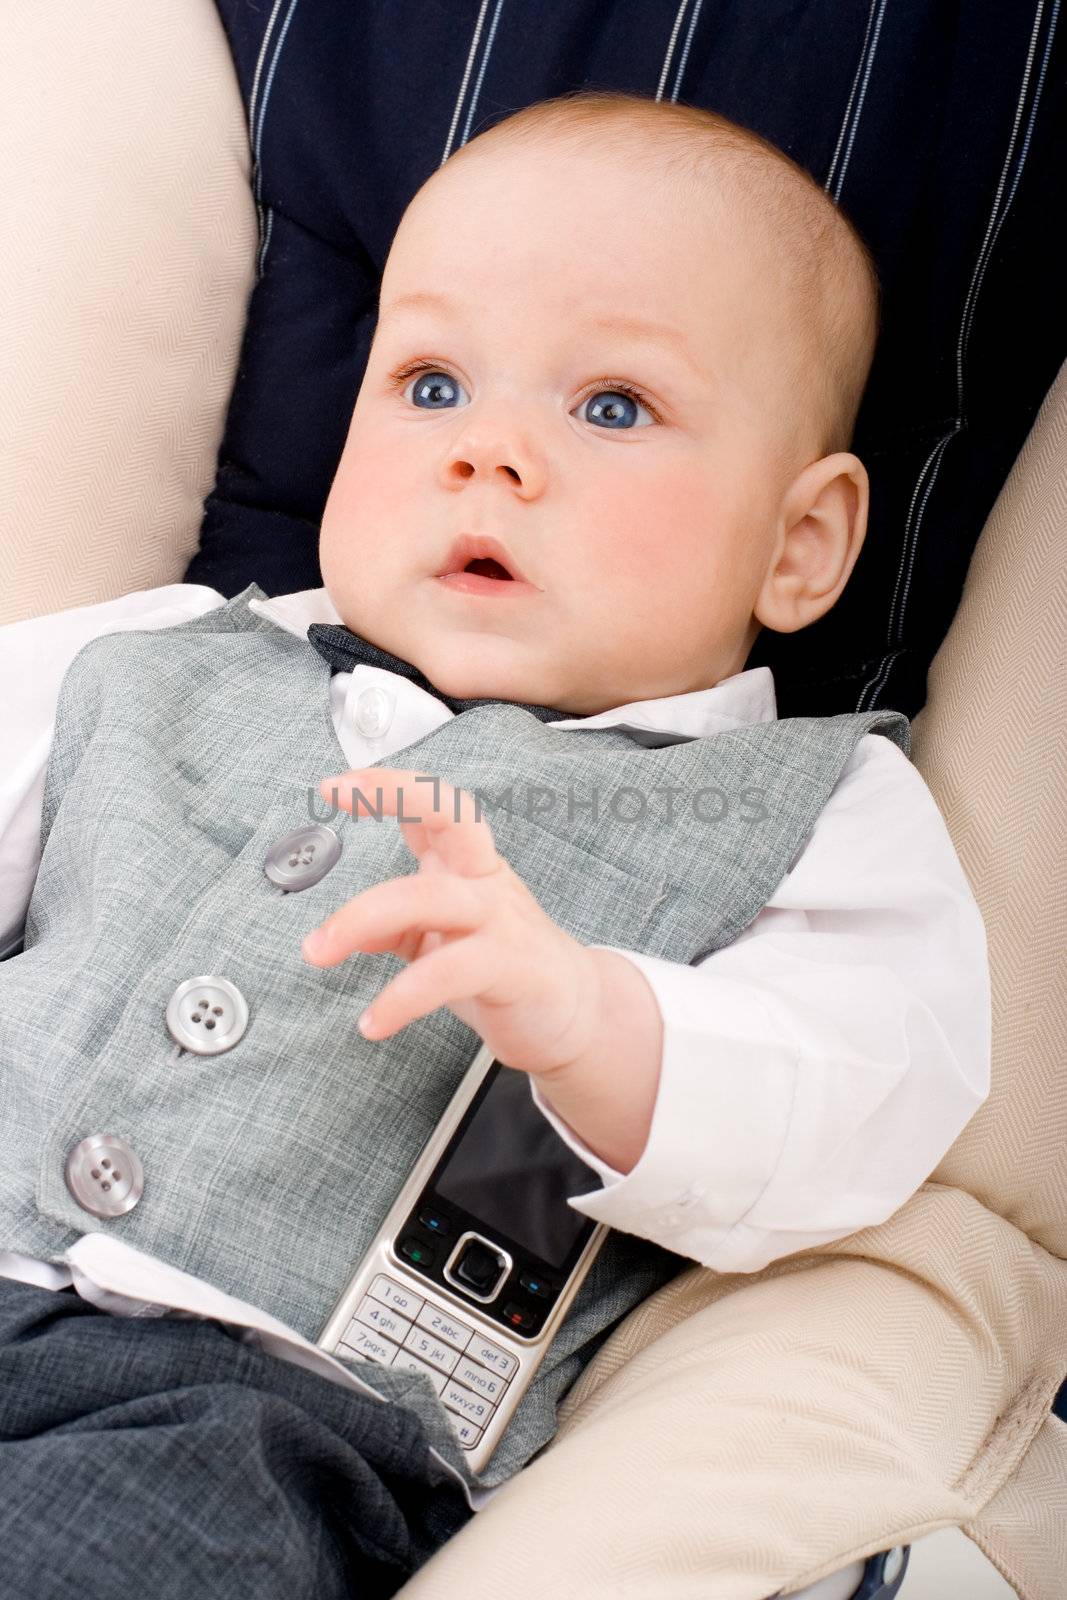 Cute baby with big blue eyes and mobile phone